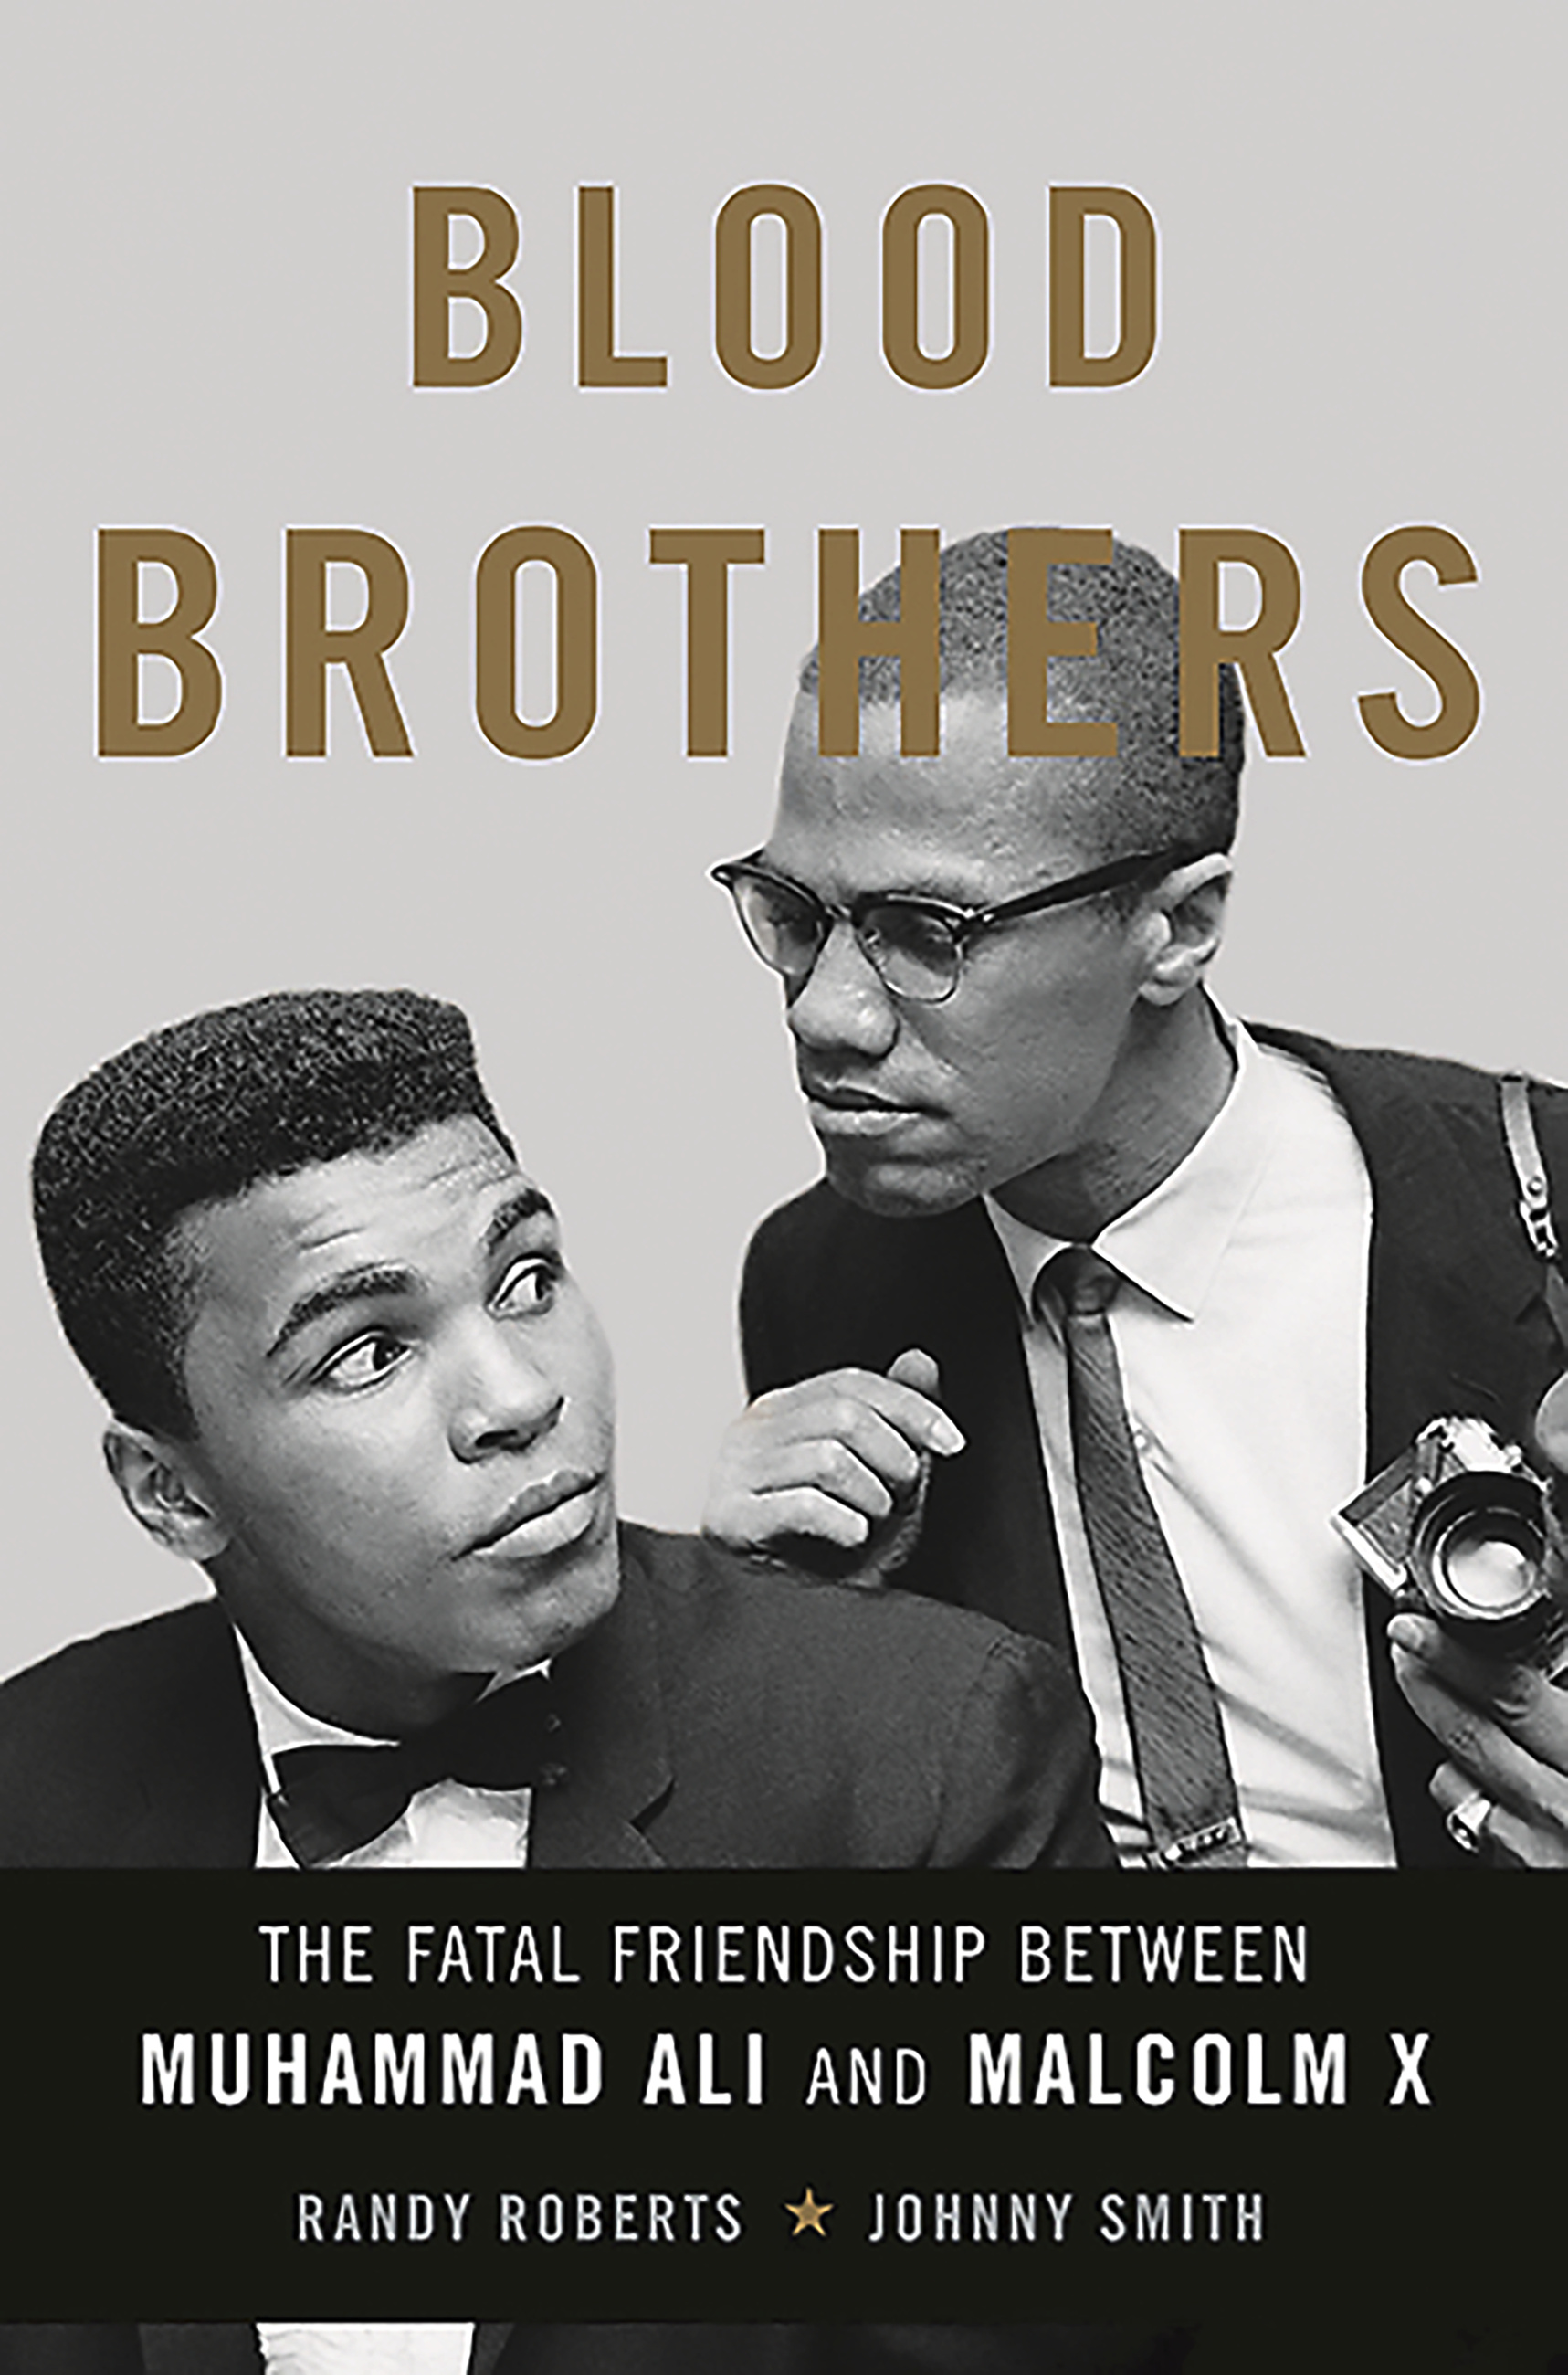 Blood Brothers The Fatal Friendship Between Muhammad Ali and Malcolm X
Epub-Ebook